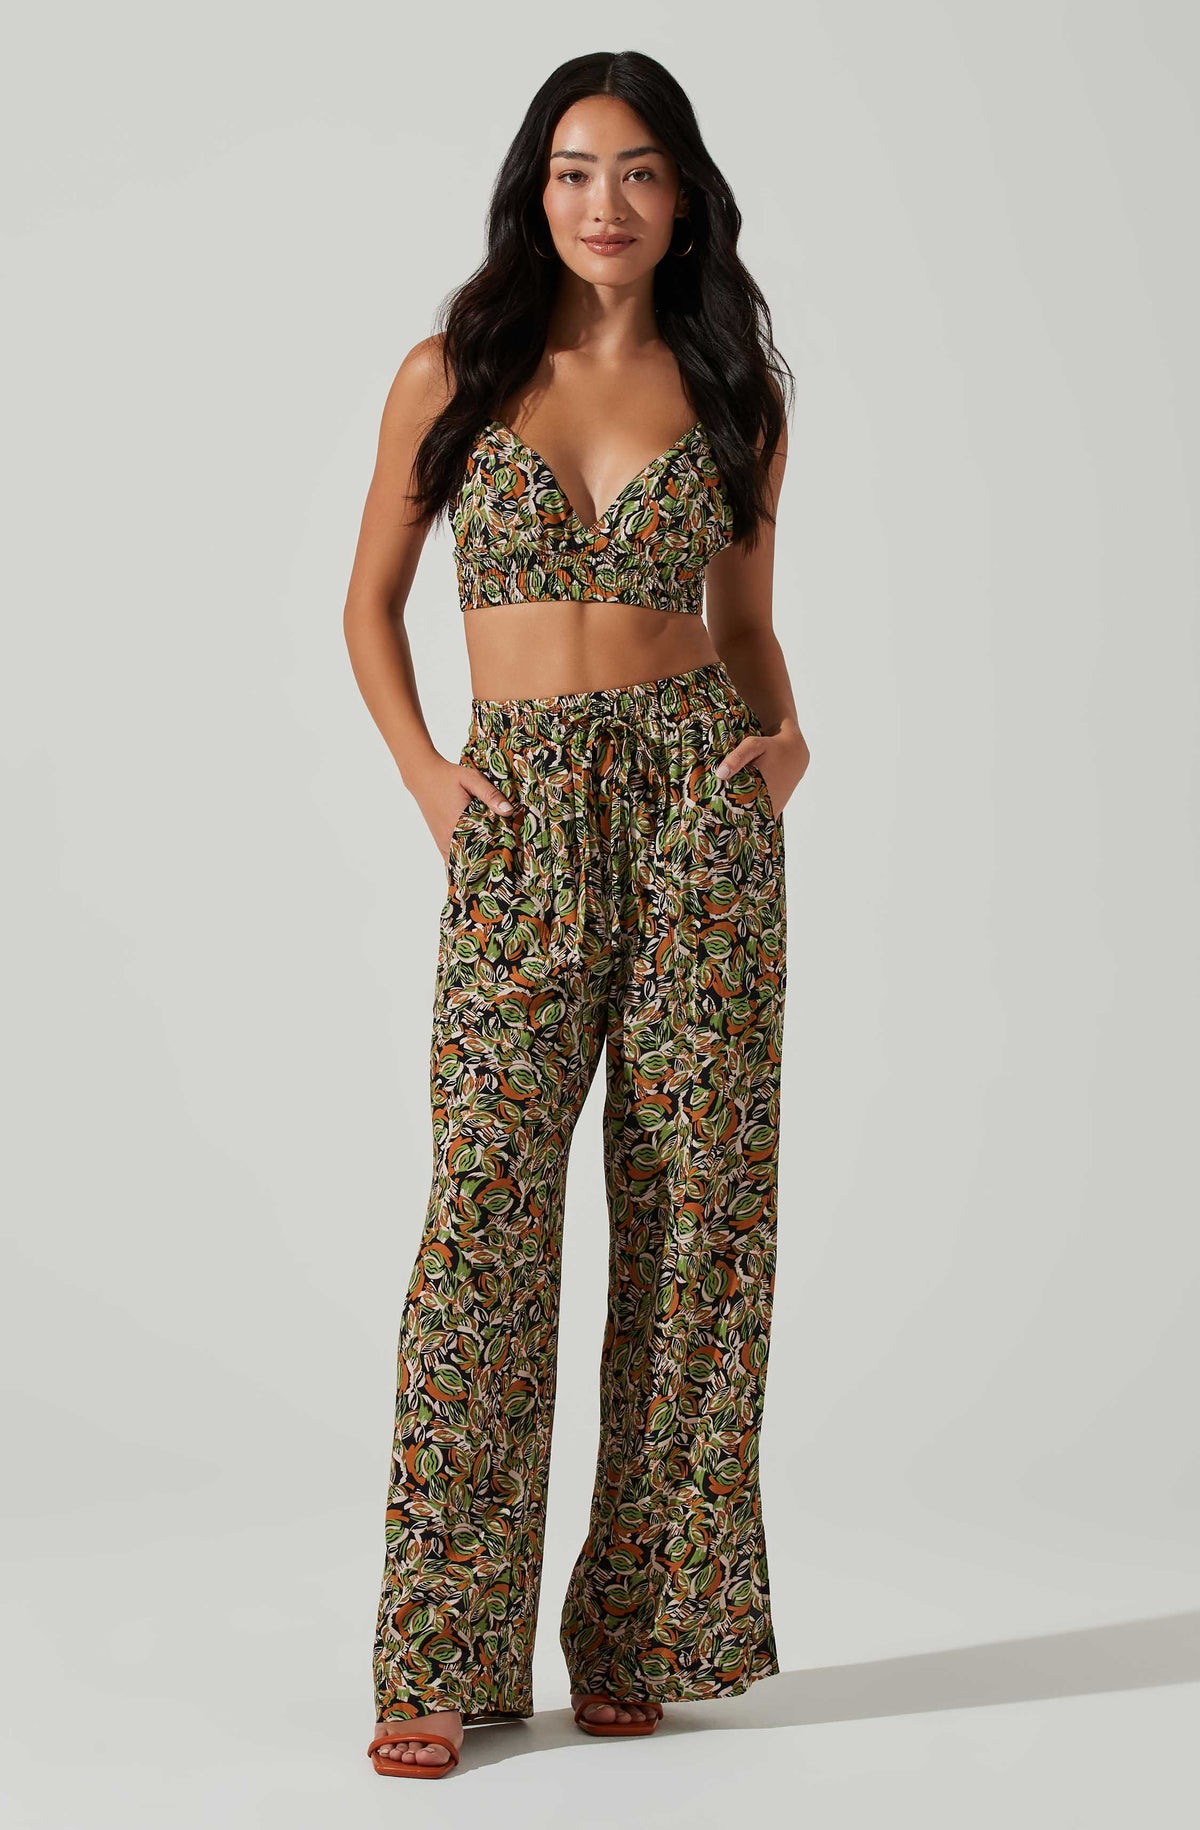 Buy White Black Vogue Print Palazzo Pants at Social Butterfly Collection  for only $ 89.00